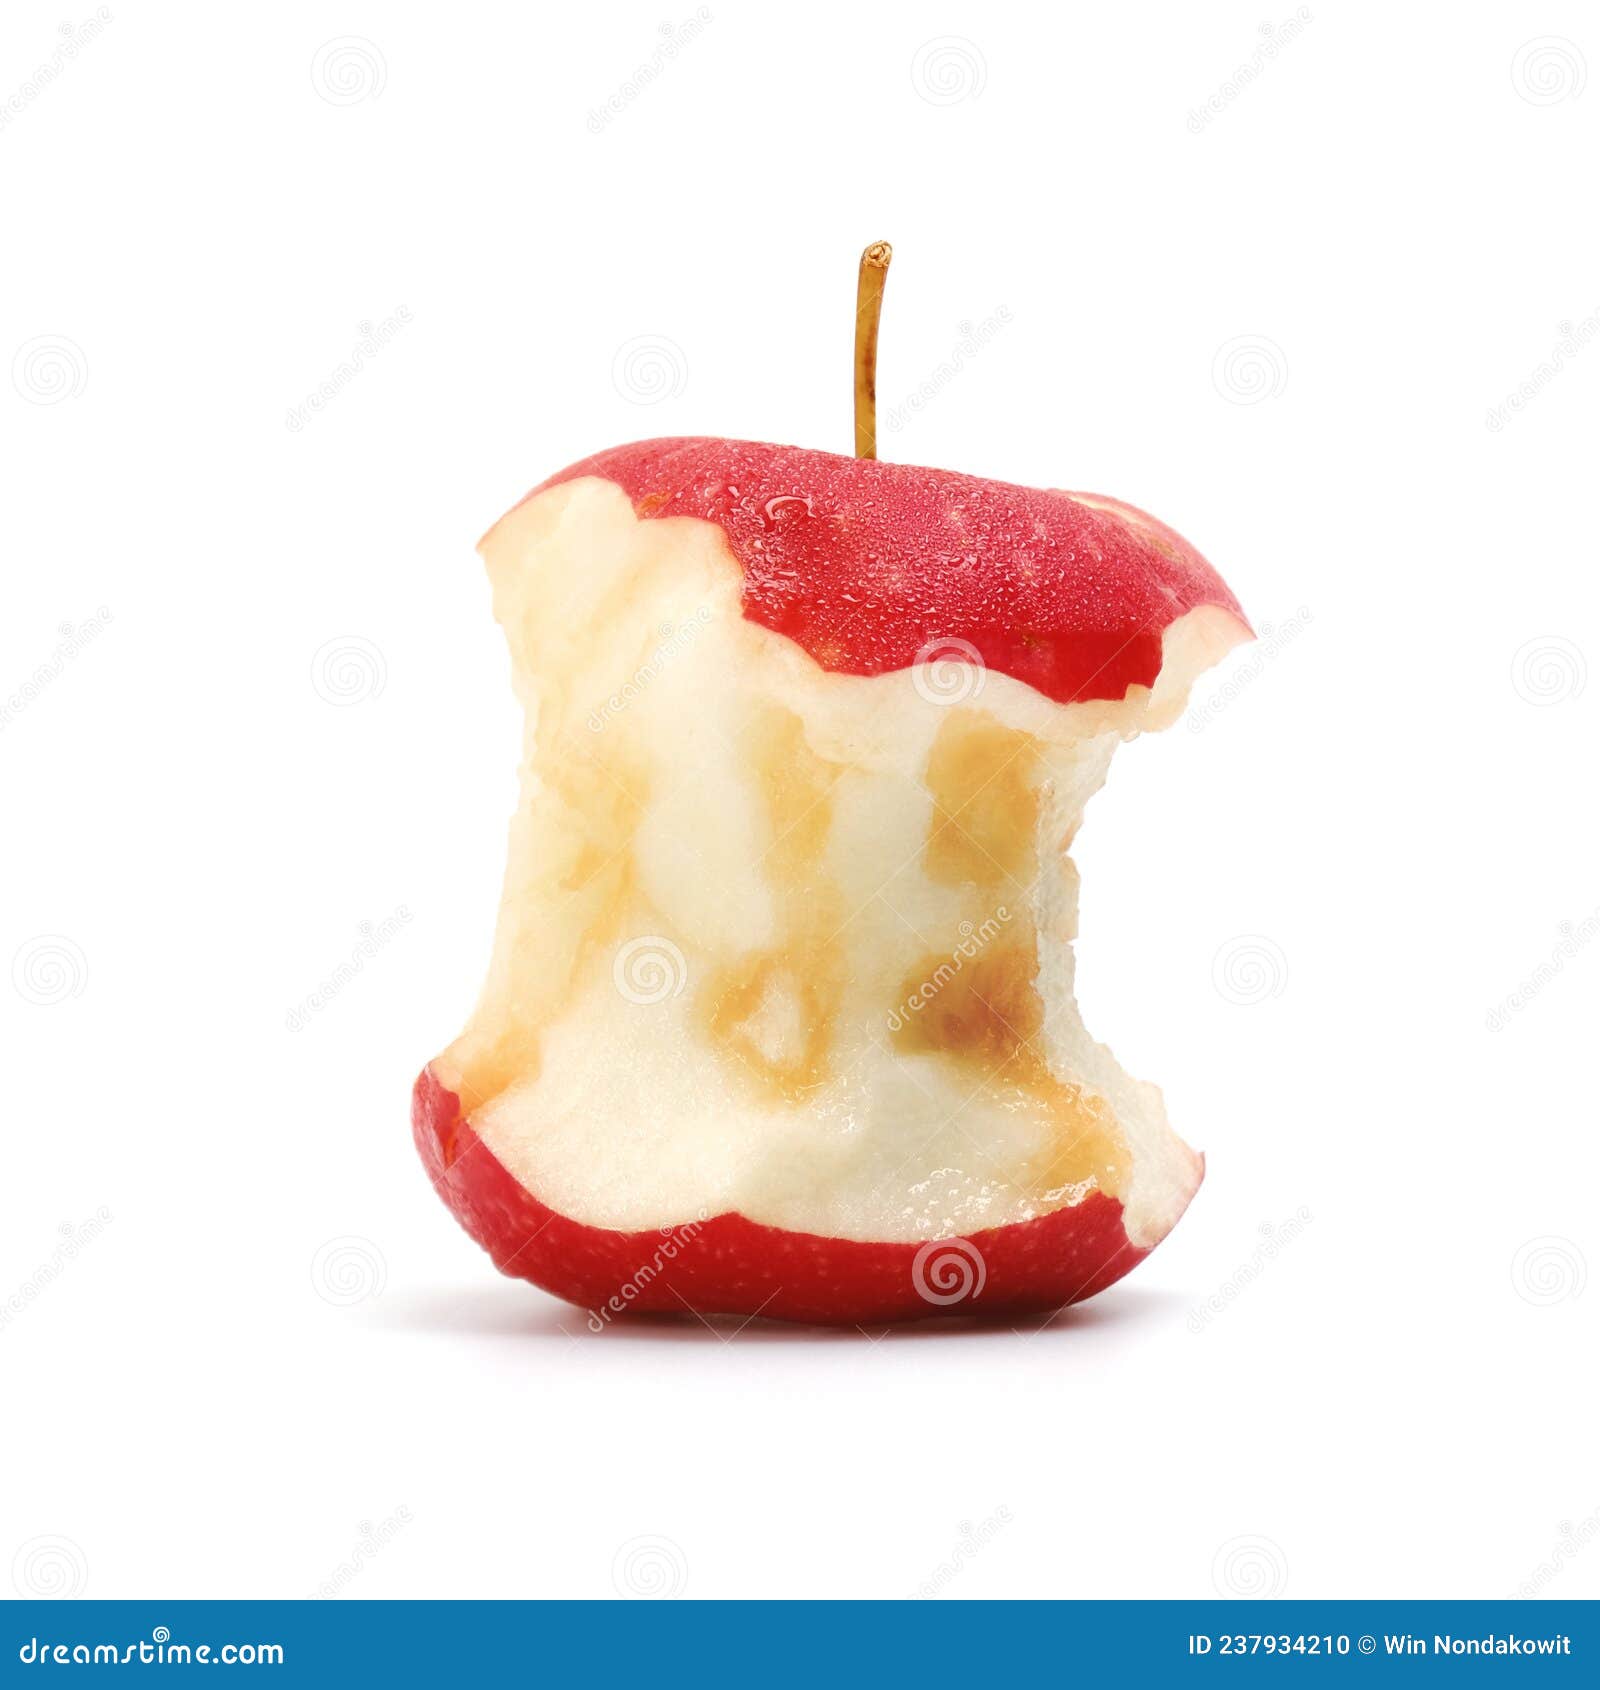 red apple core